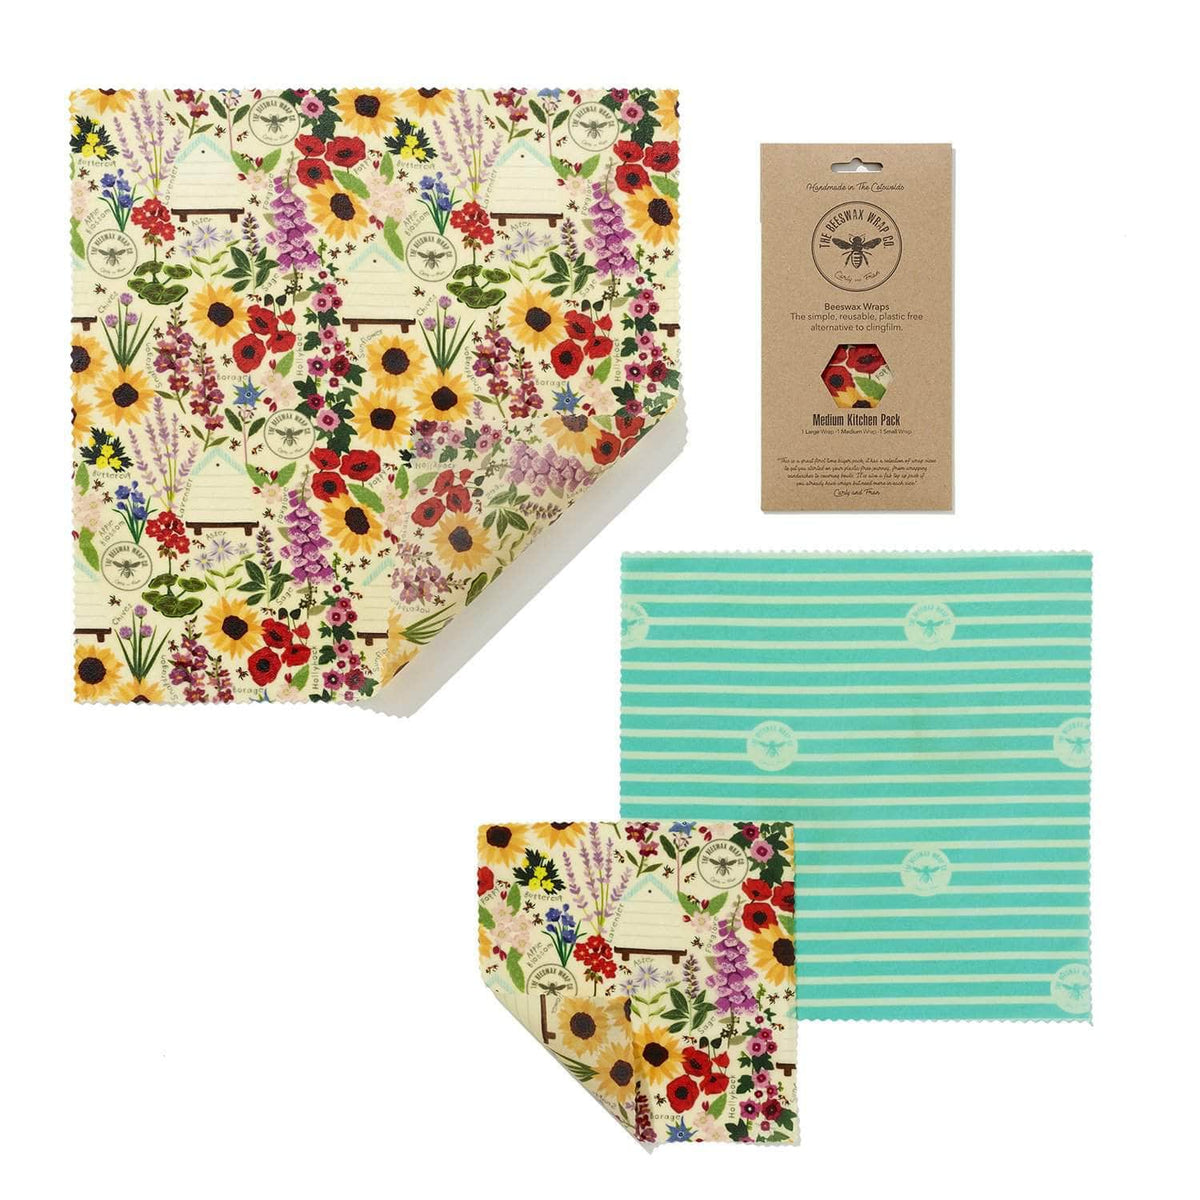 Beeswax wraps: Floral